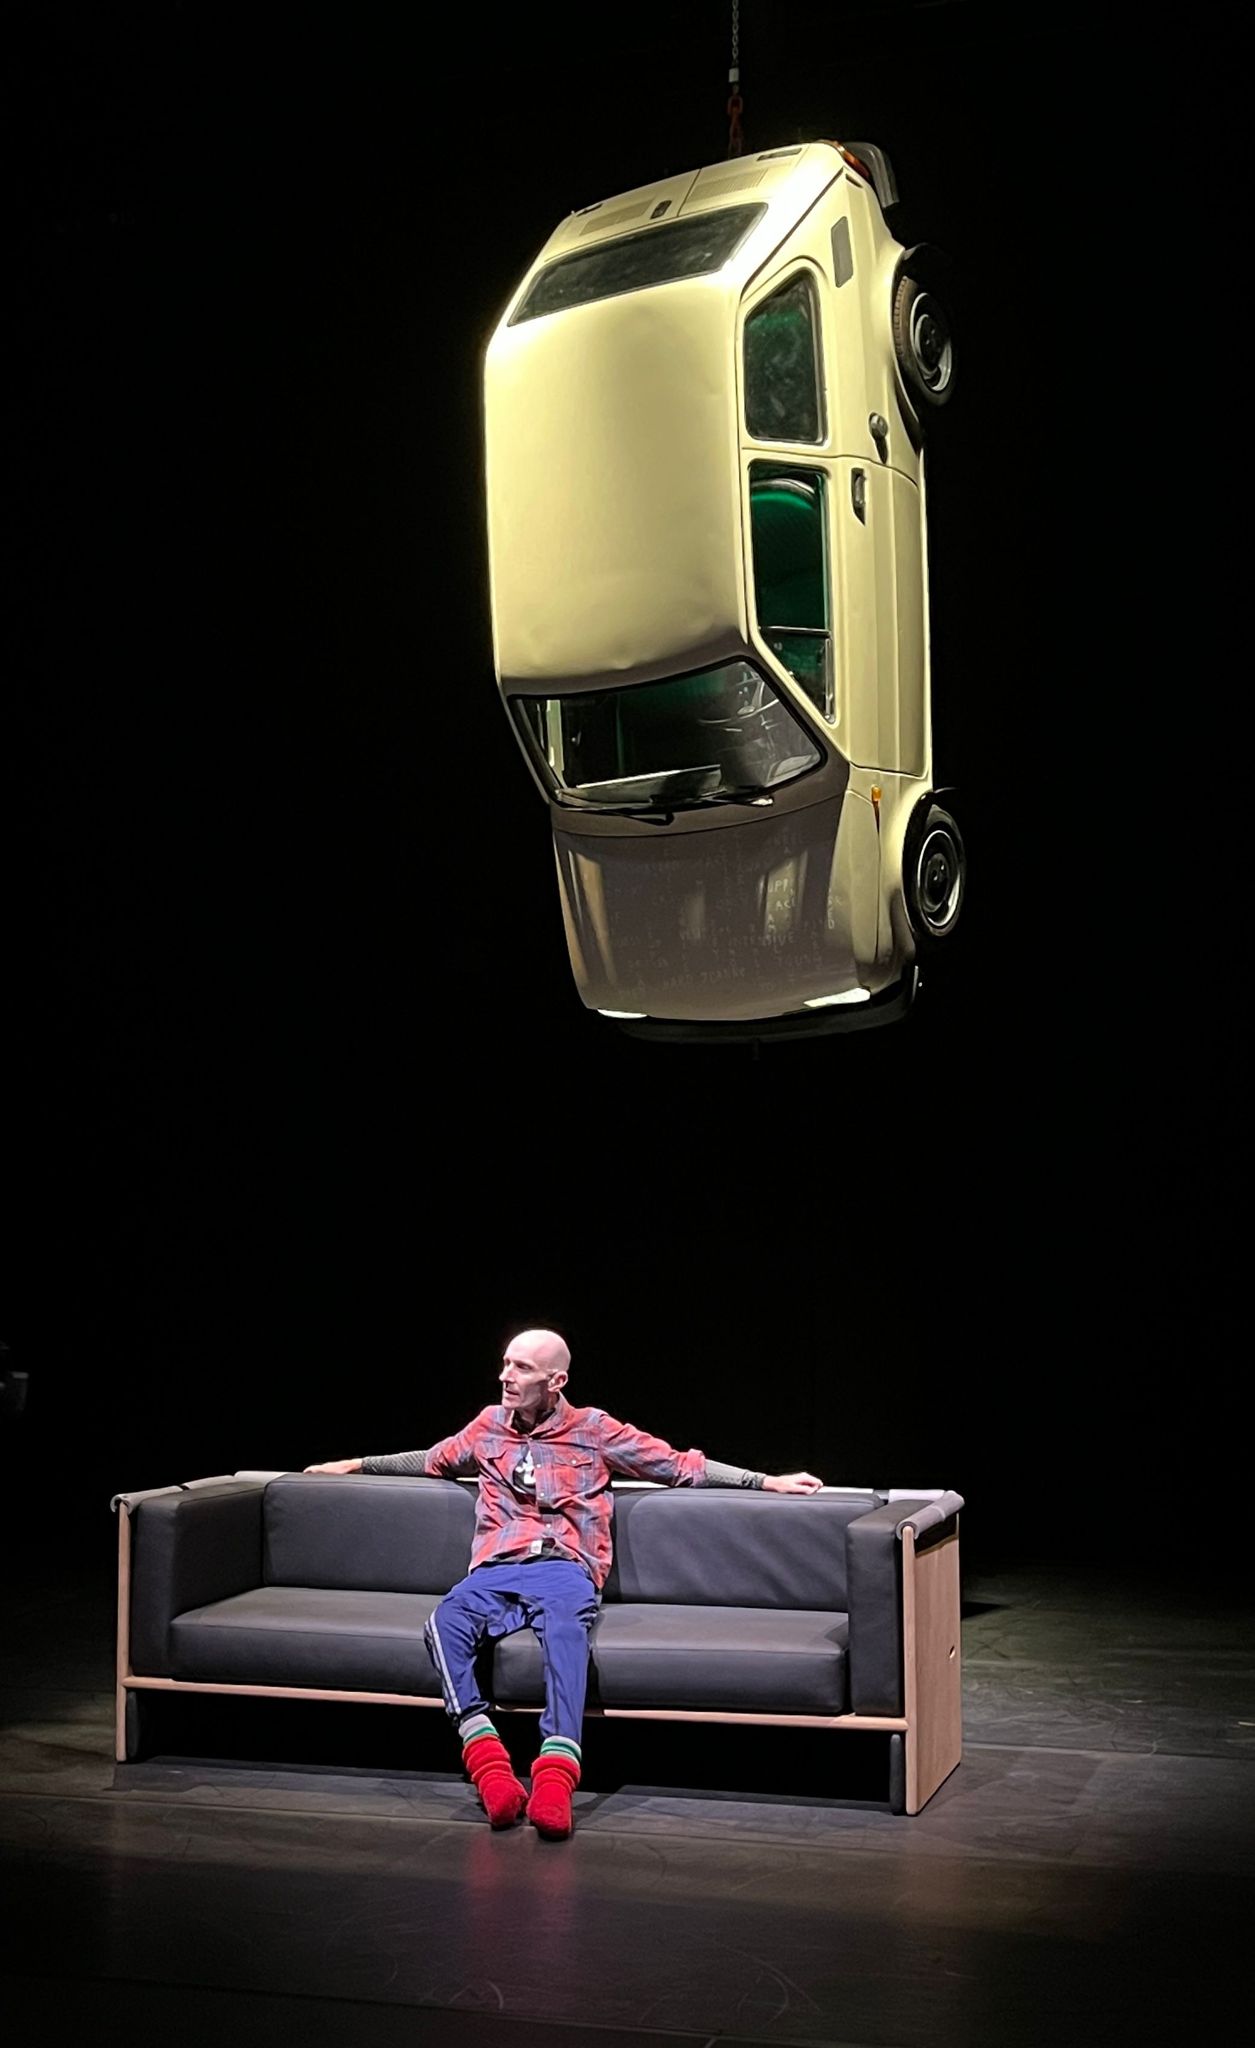 marc sits on a grey sofa, arms stretched along the back of it. The back drop is black. Above his head, suspended in the air is a small white car, illuminating him with its headlights.